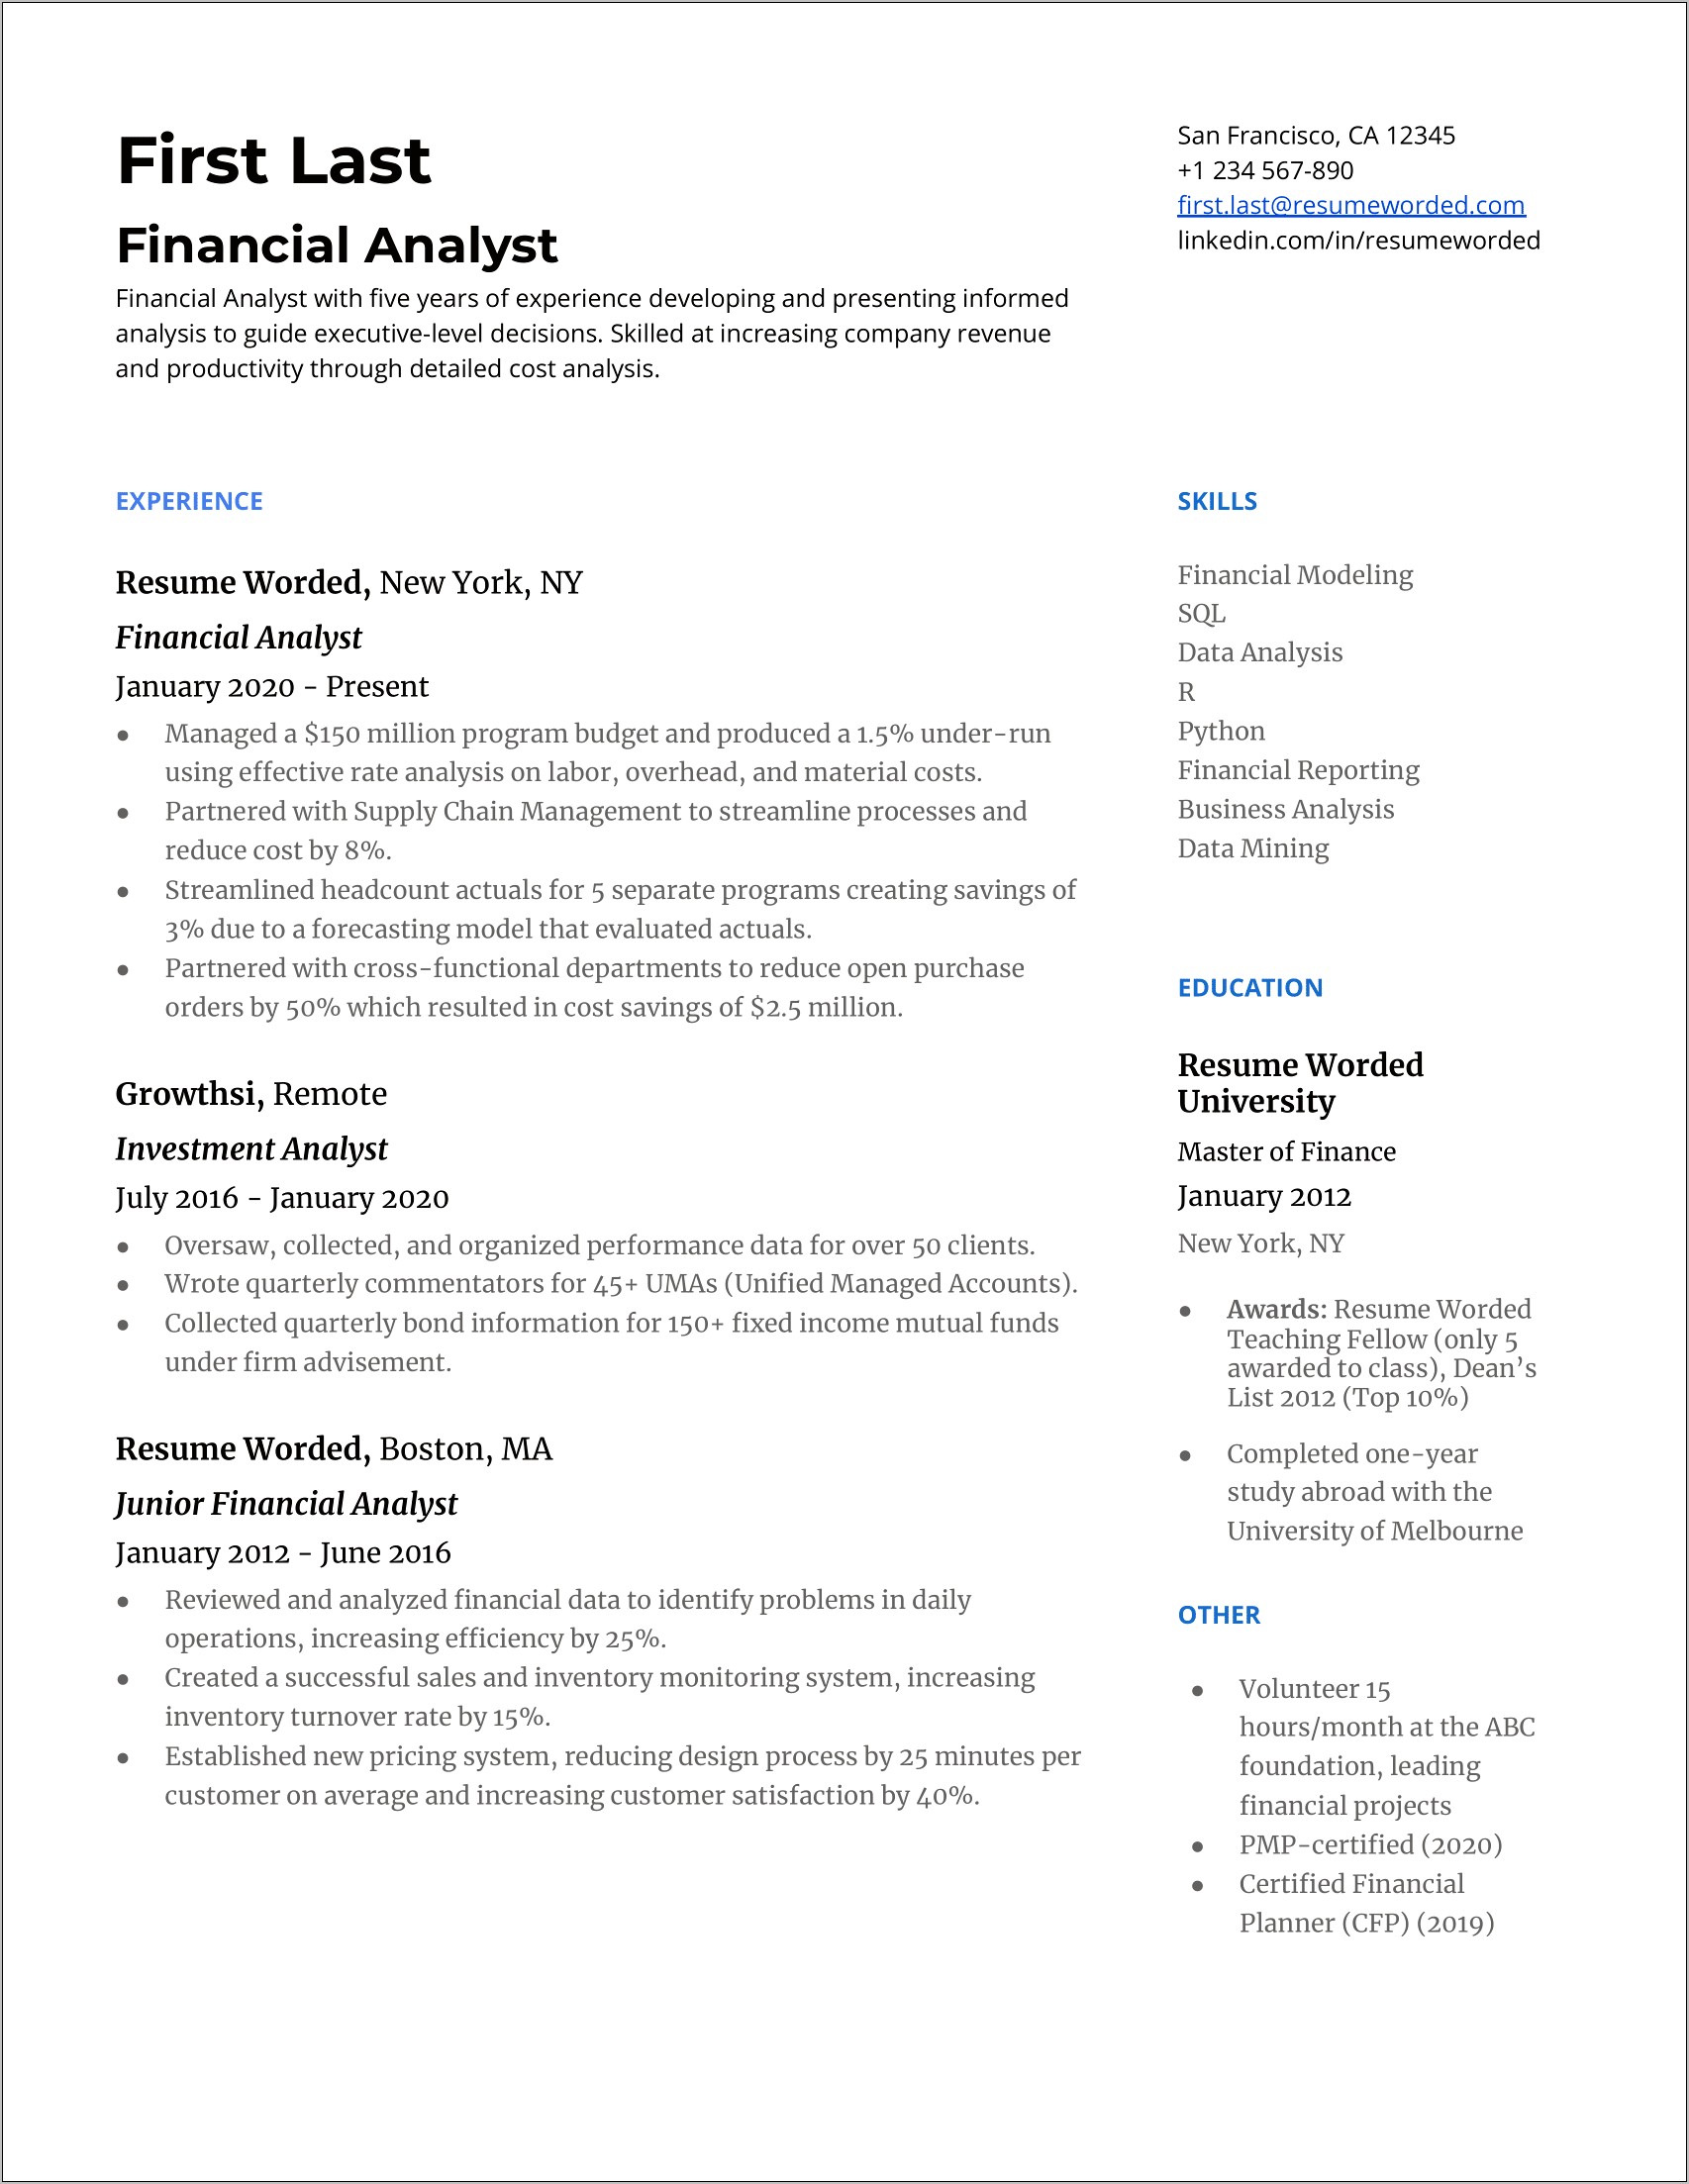 Asset To This Company Resume Examples